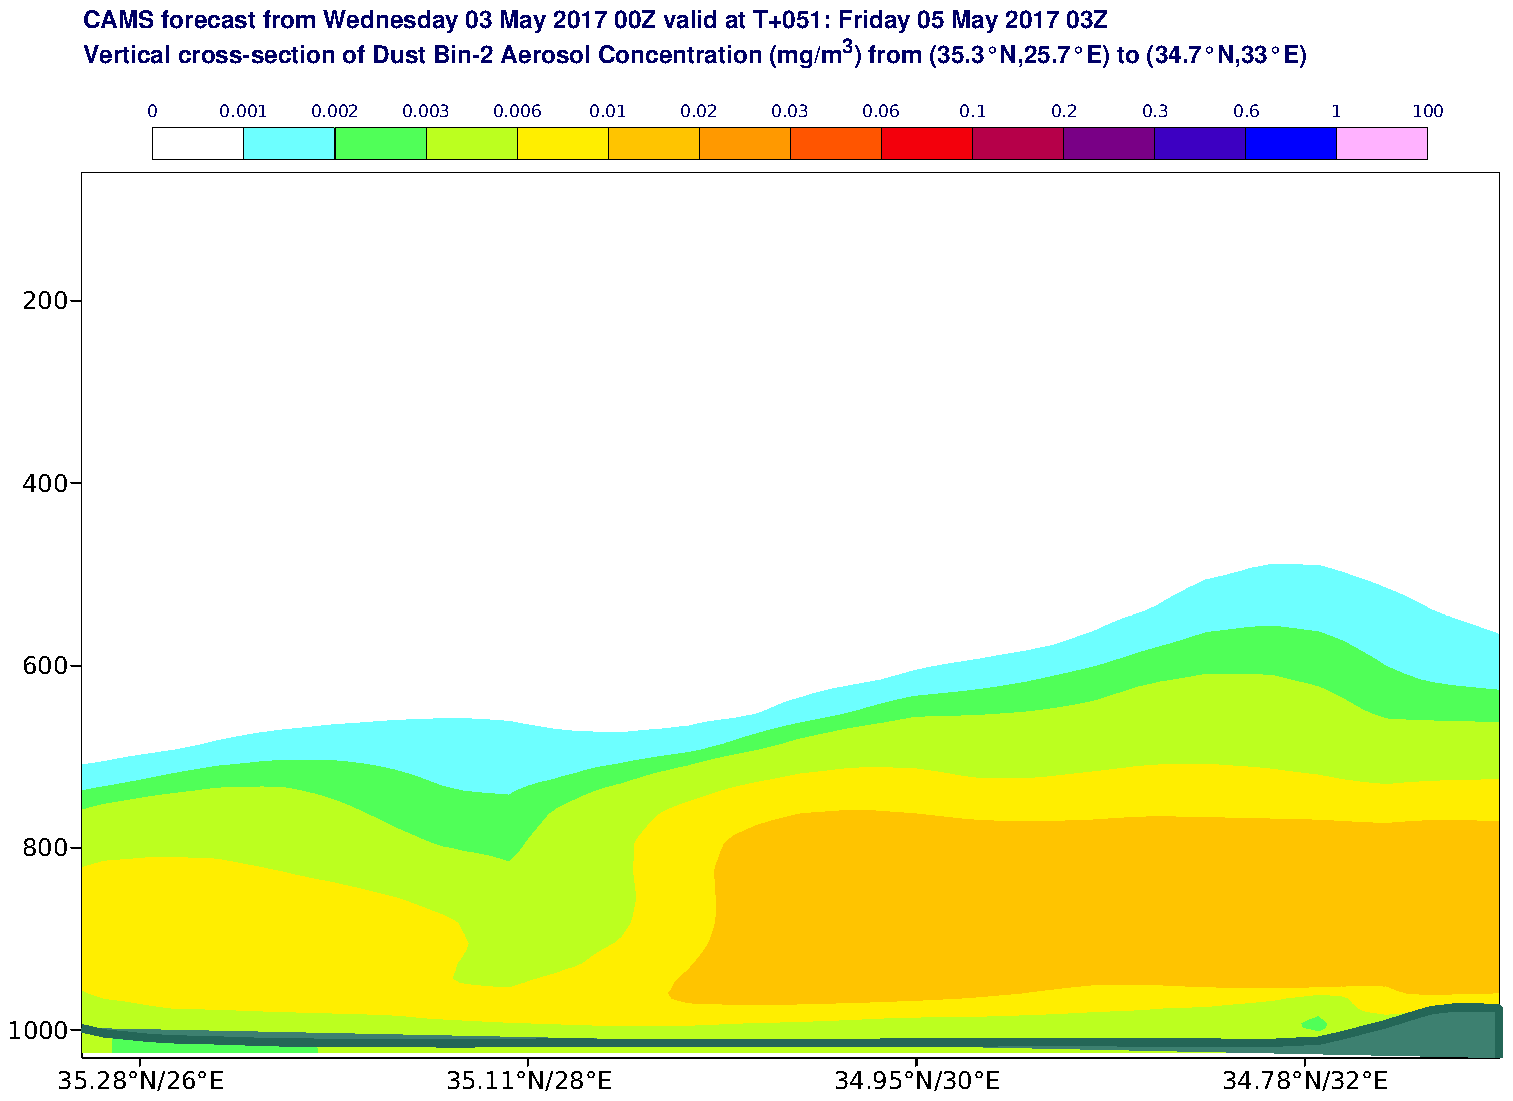 Vertical cross-section of Dust Bin-2 Aerosol Concentration (mg/m3) valid at T51 - 2017-05-05 03:00